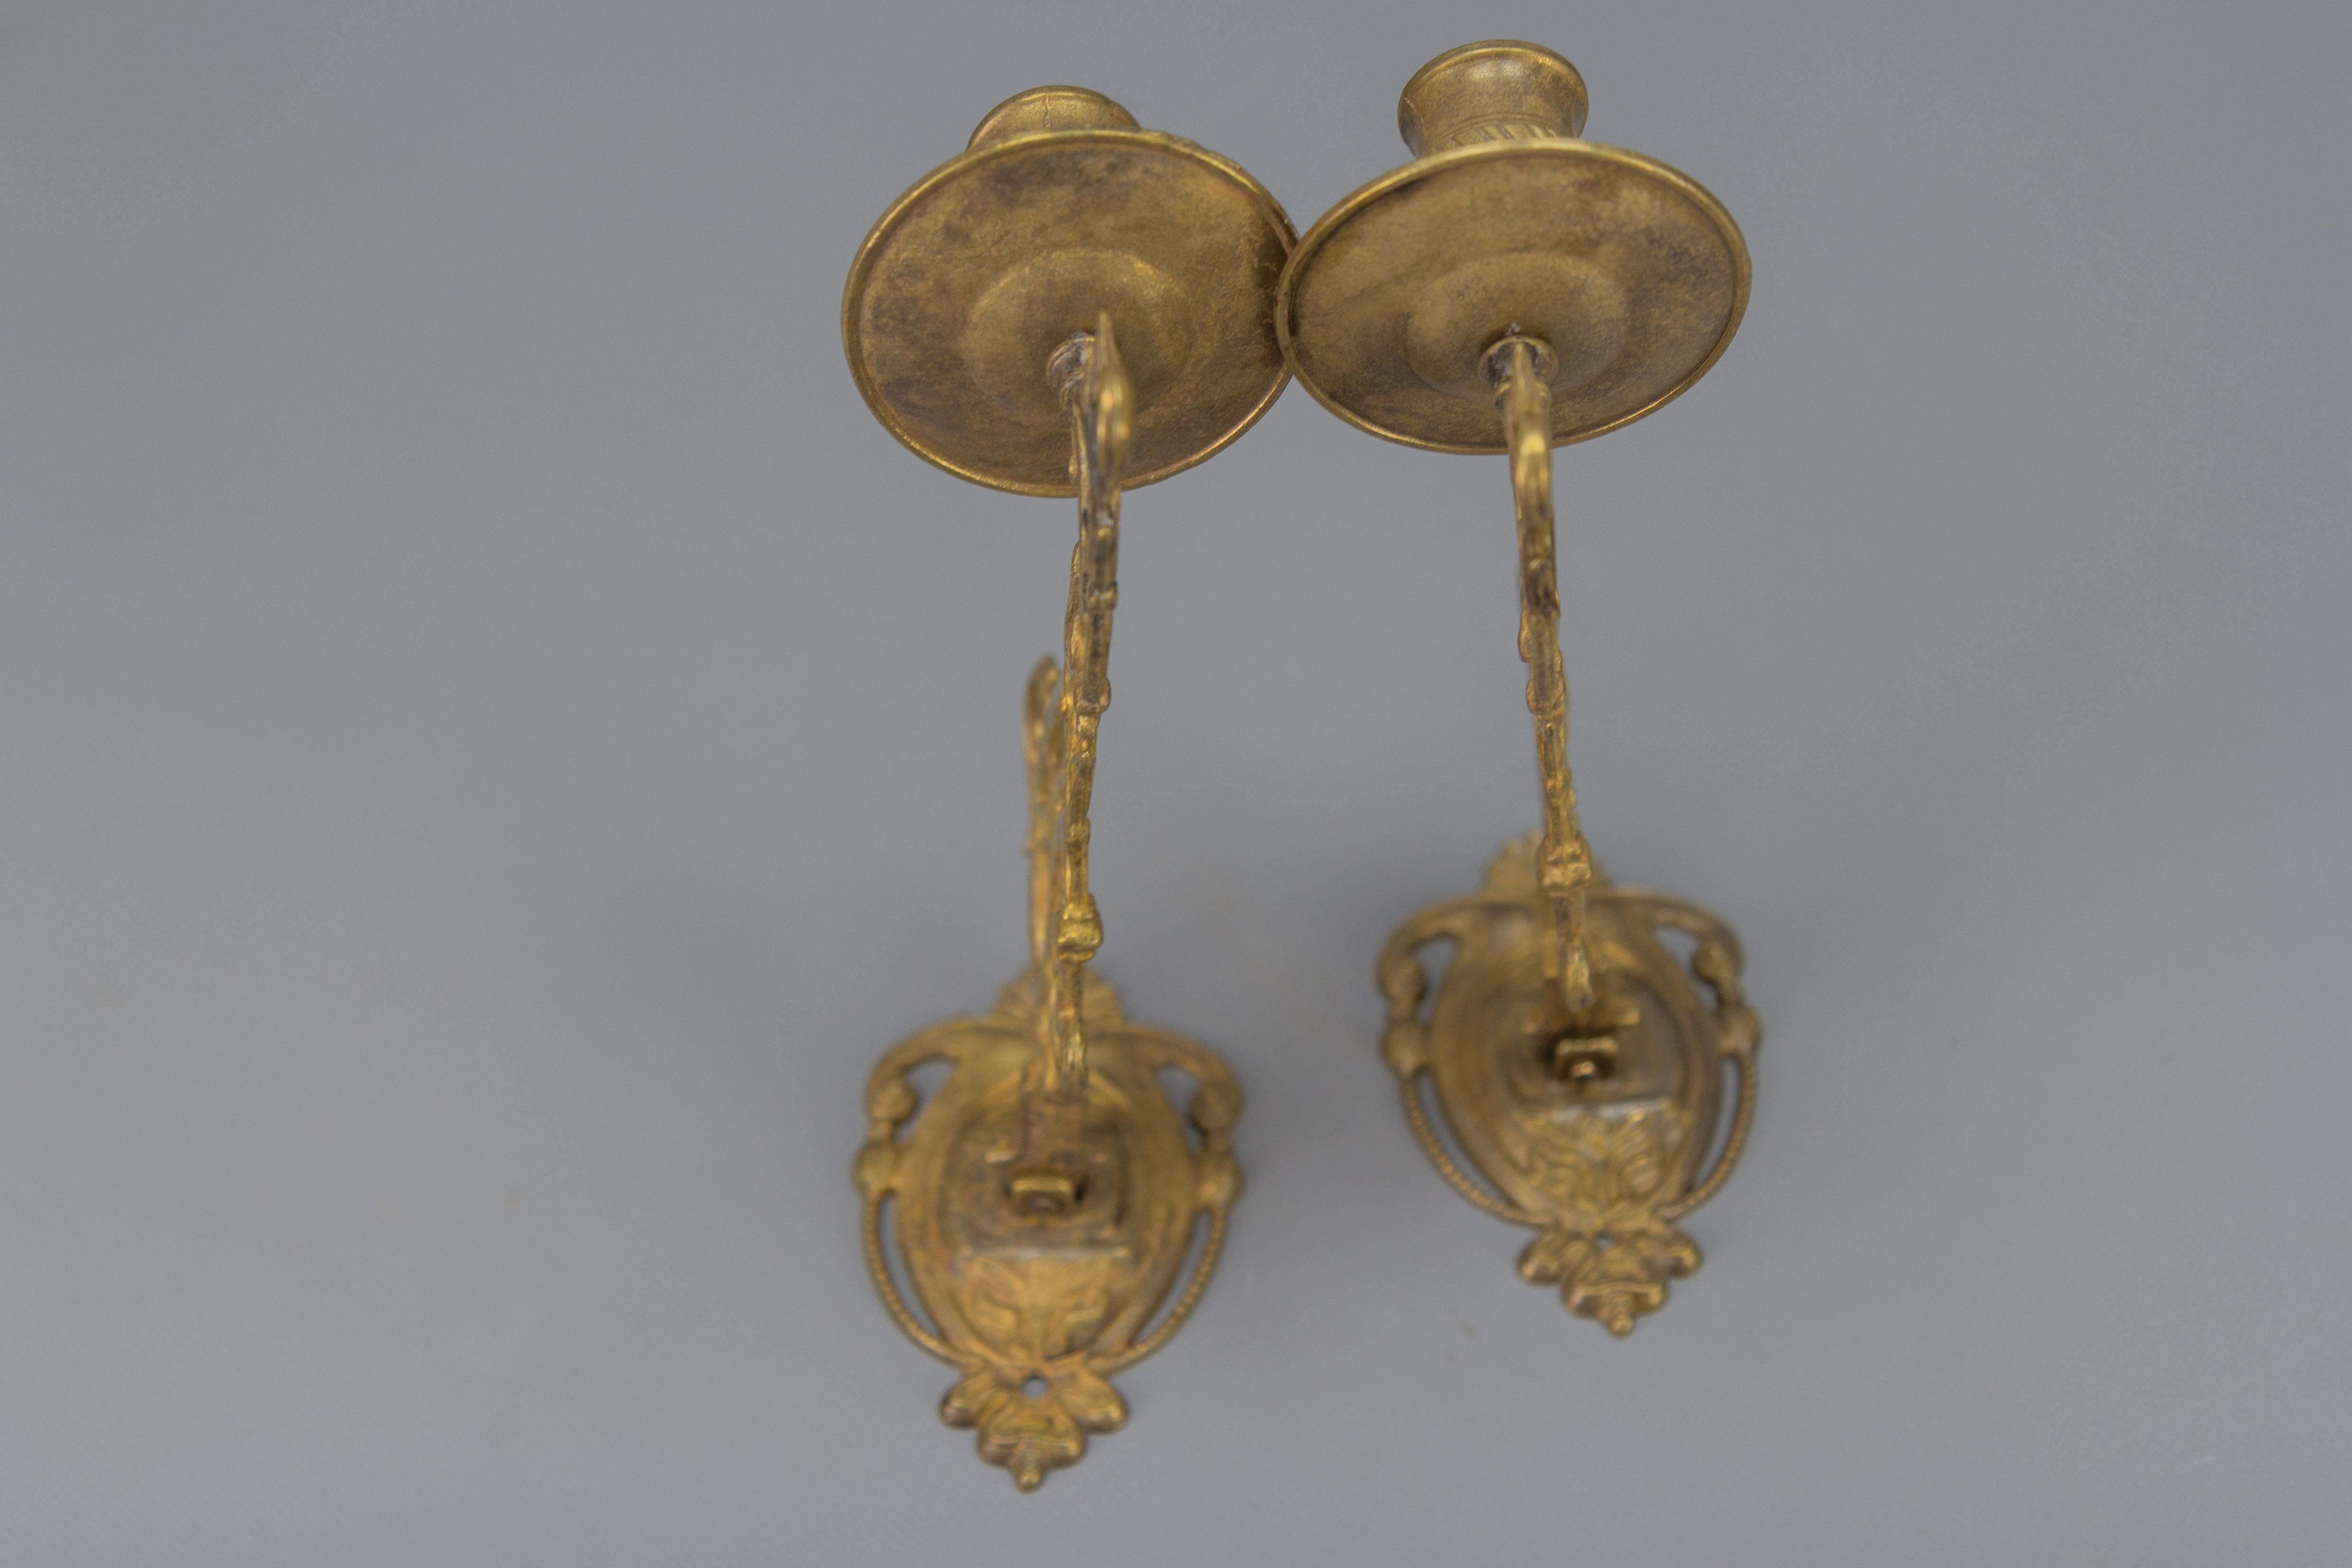 Pair of French Art Nouveau Style Piano Candlesticks or Wall Lights, 1950s For Sale 8